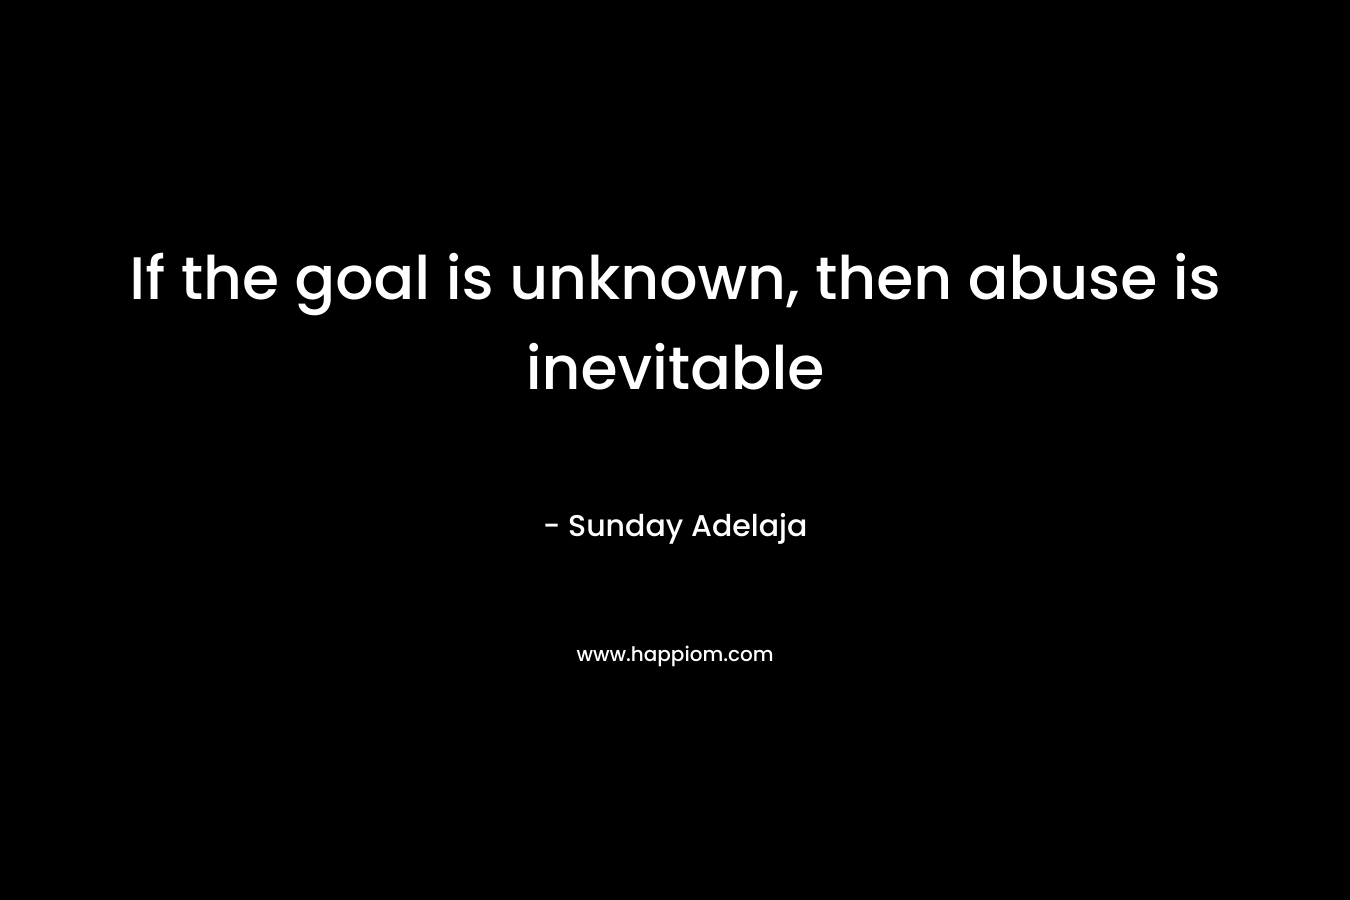 If the goal is unknown, then abuse is inevitable